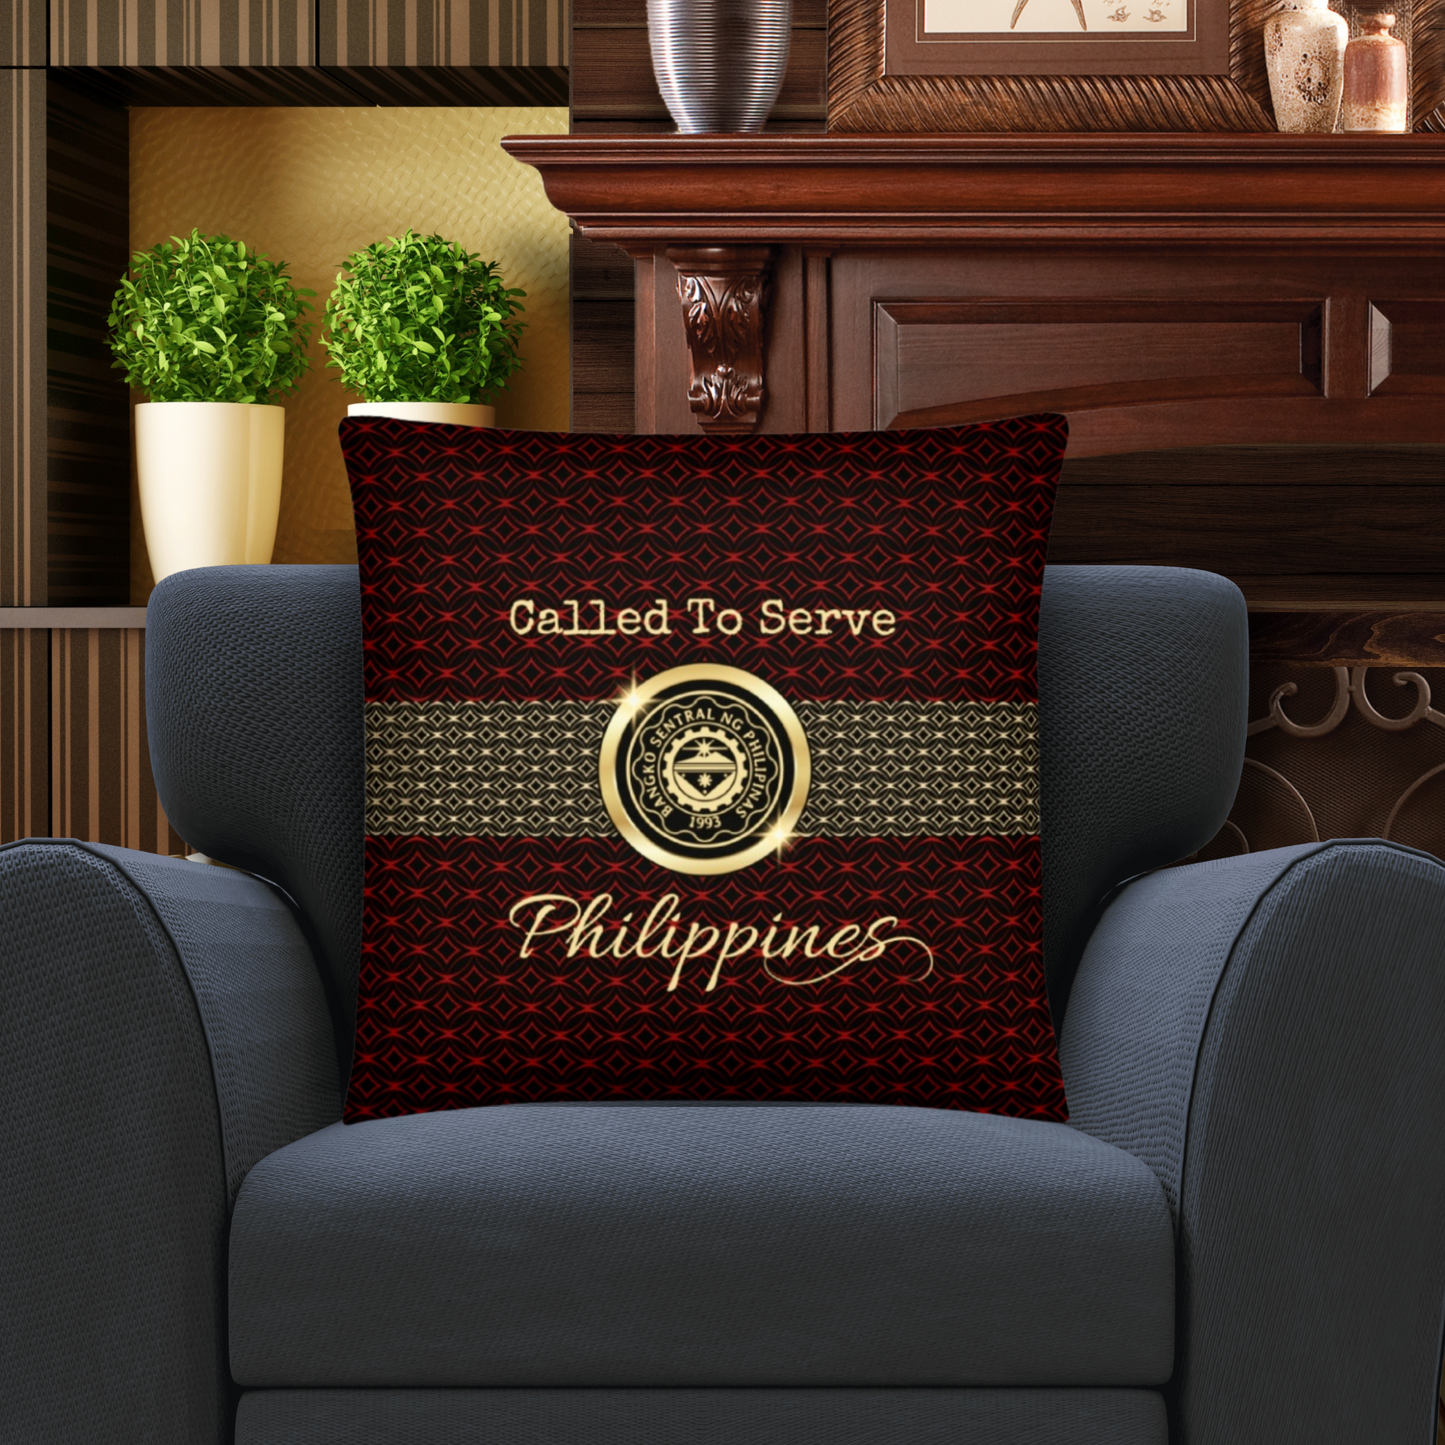 Philippines Missionary Gift #2 | Best Missionary Gift Ideas | Mission Call Gifts | Called to Serve Gifts | Missionary Mom Gifts | Best Latter Day Saint Gifts | LDS Missionary Gifts | Philippines Home Decor